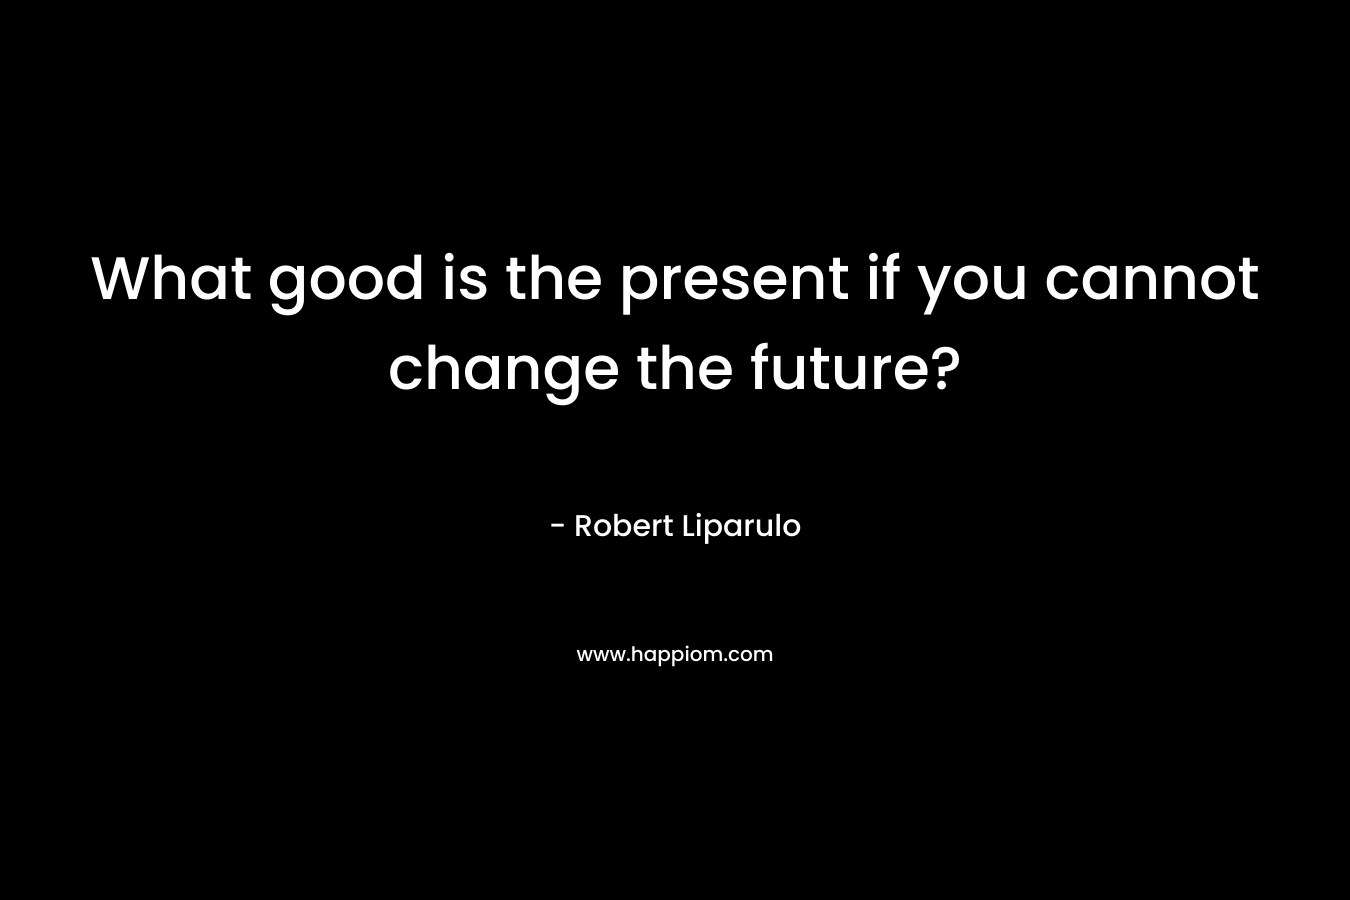 What good is the present if you cannot change the future? – Robert Liparulo